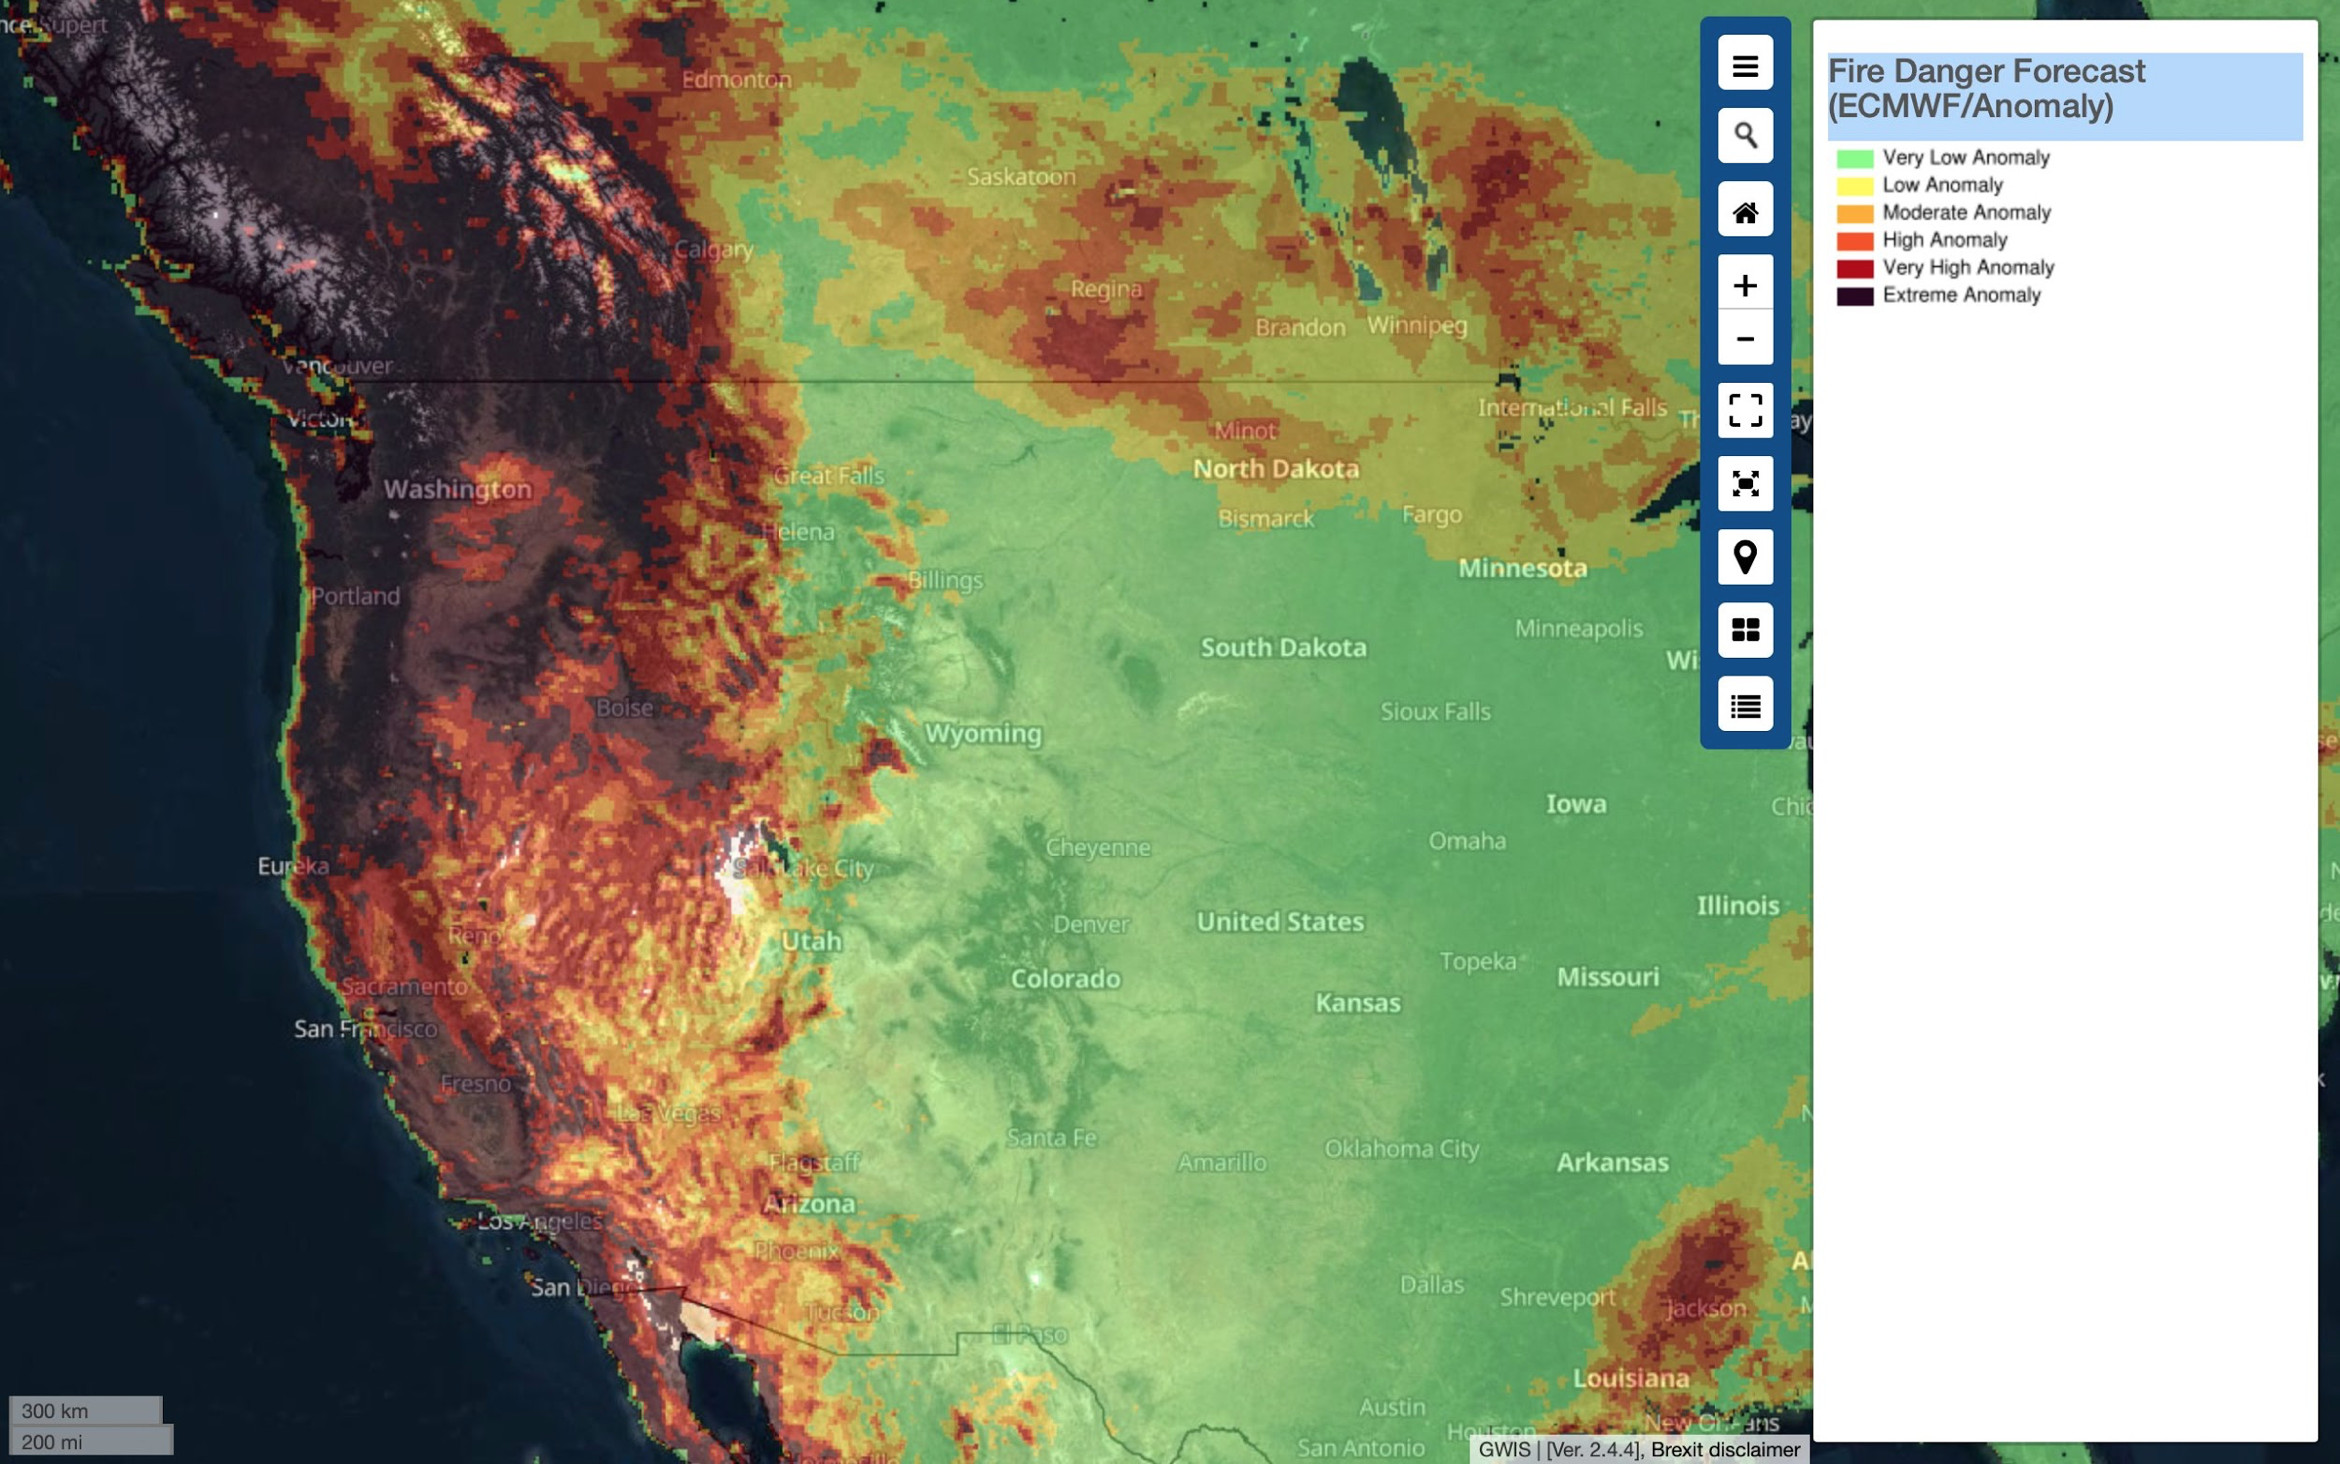 Image shows the anomaly rate and Fire Danger Forecast for wildfires in California and Oregon, USA, from the Global Wildfire Information System (GWIS) on 21 September 2020. Image via Copernicus EU.